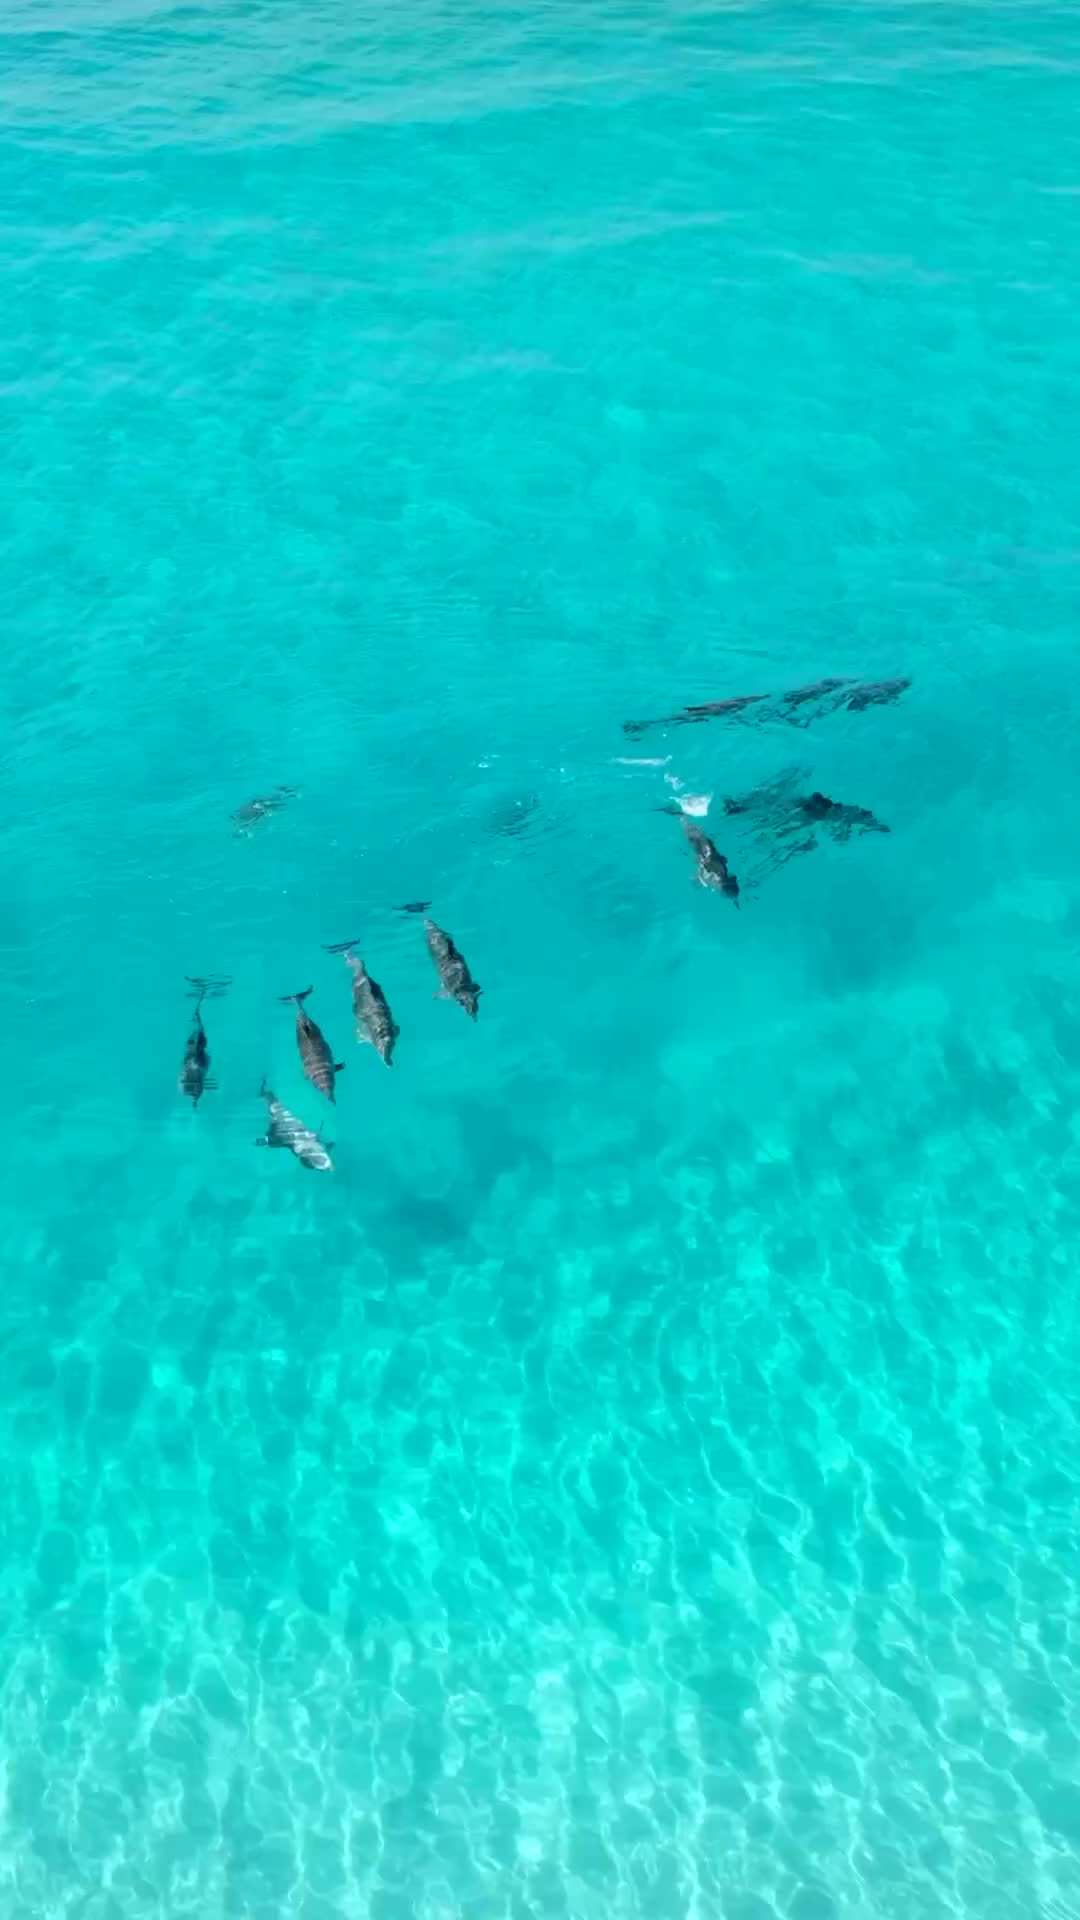 Dolphin Dance in Turquoise Waters of Esperance, WA